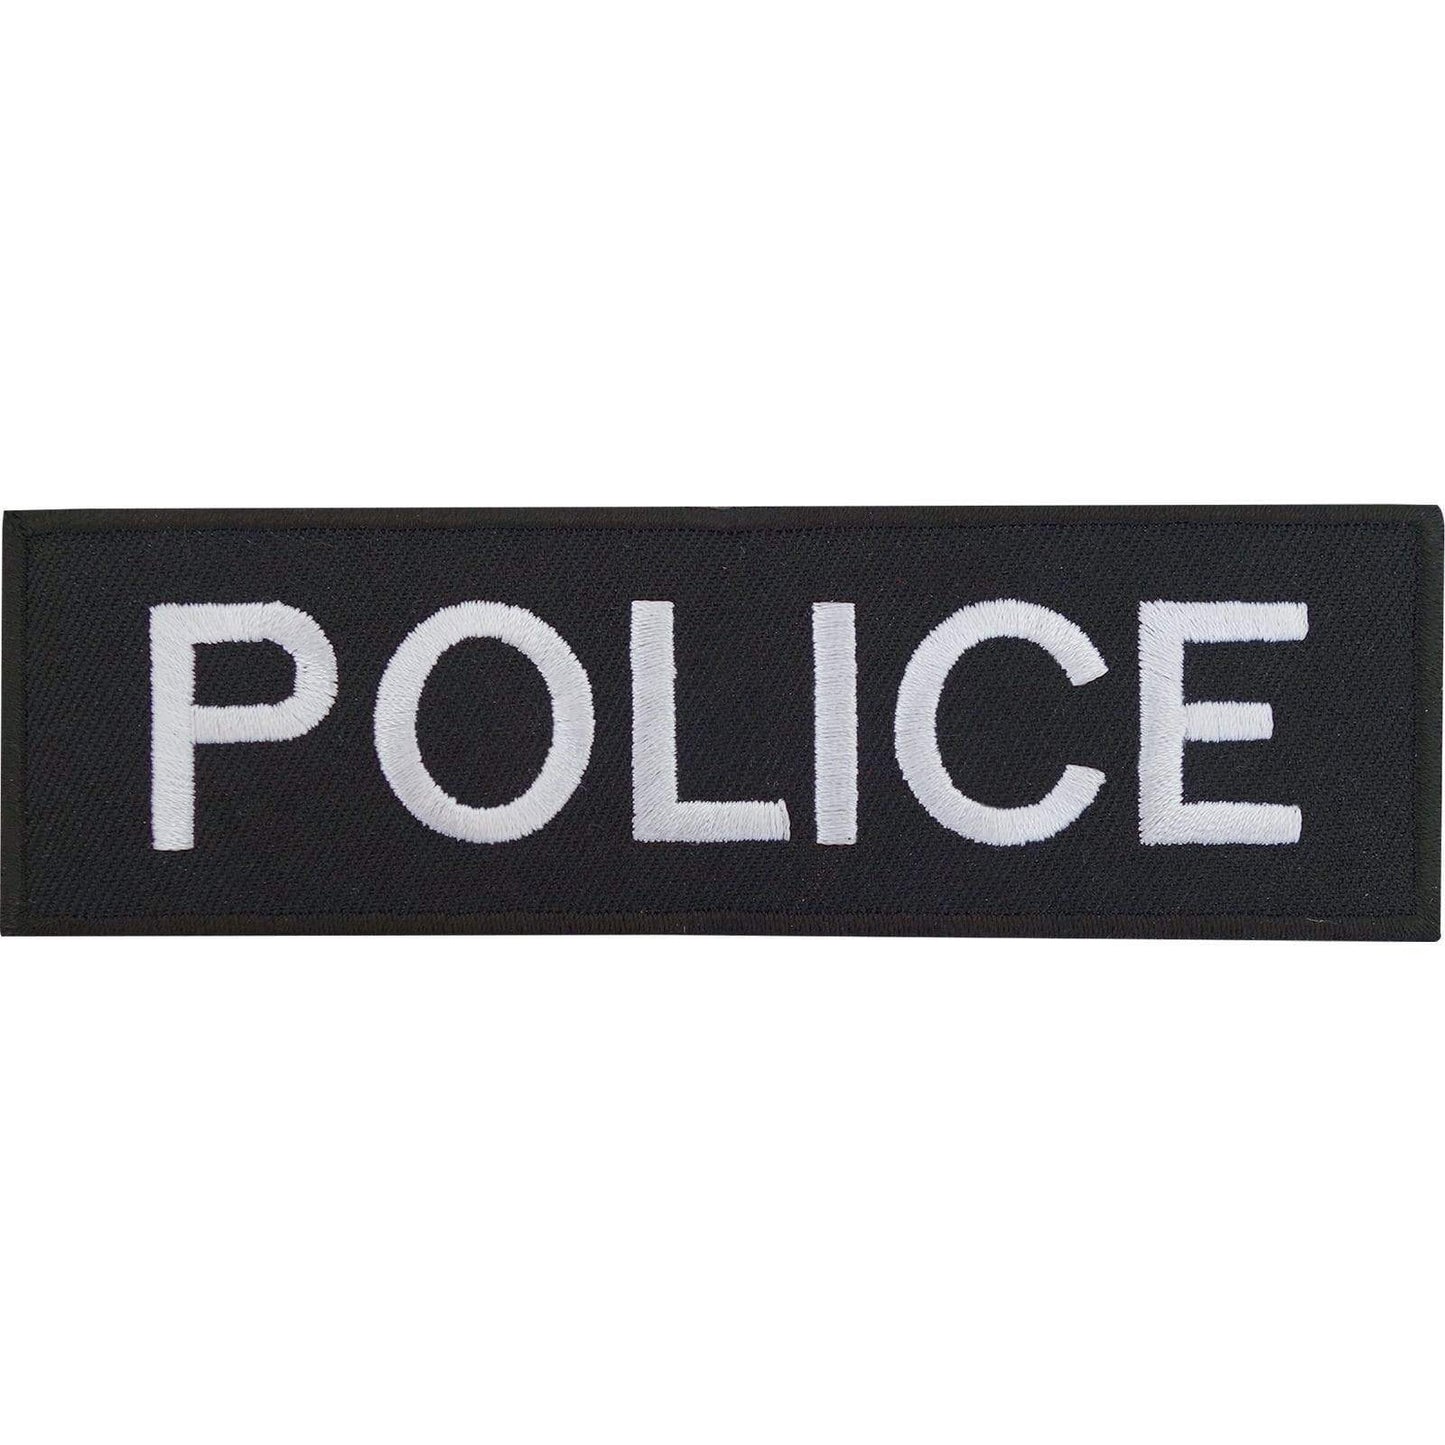 Police Patch Embroidered Iron Sew On Badge Policeman Officer Fancy Dress Costume